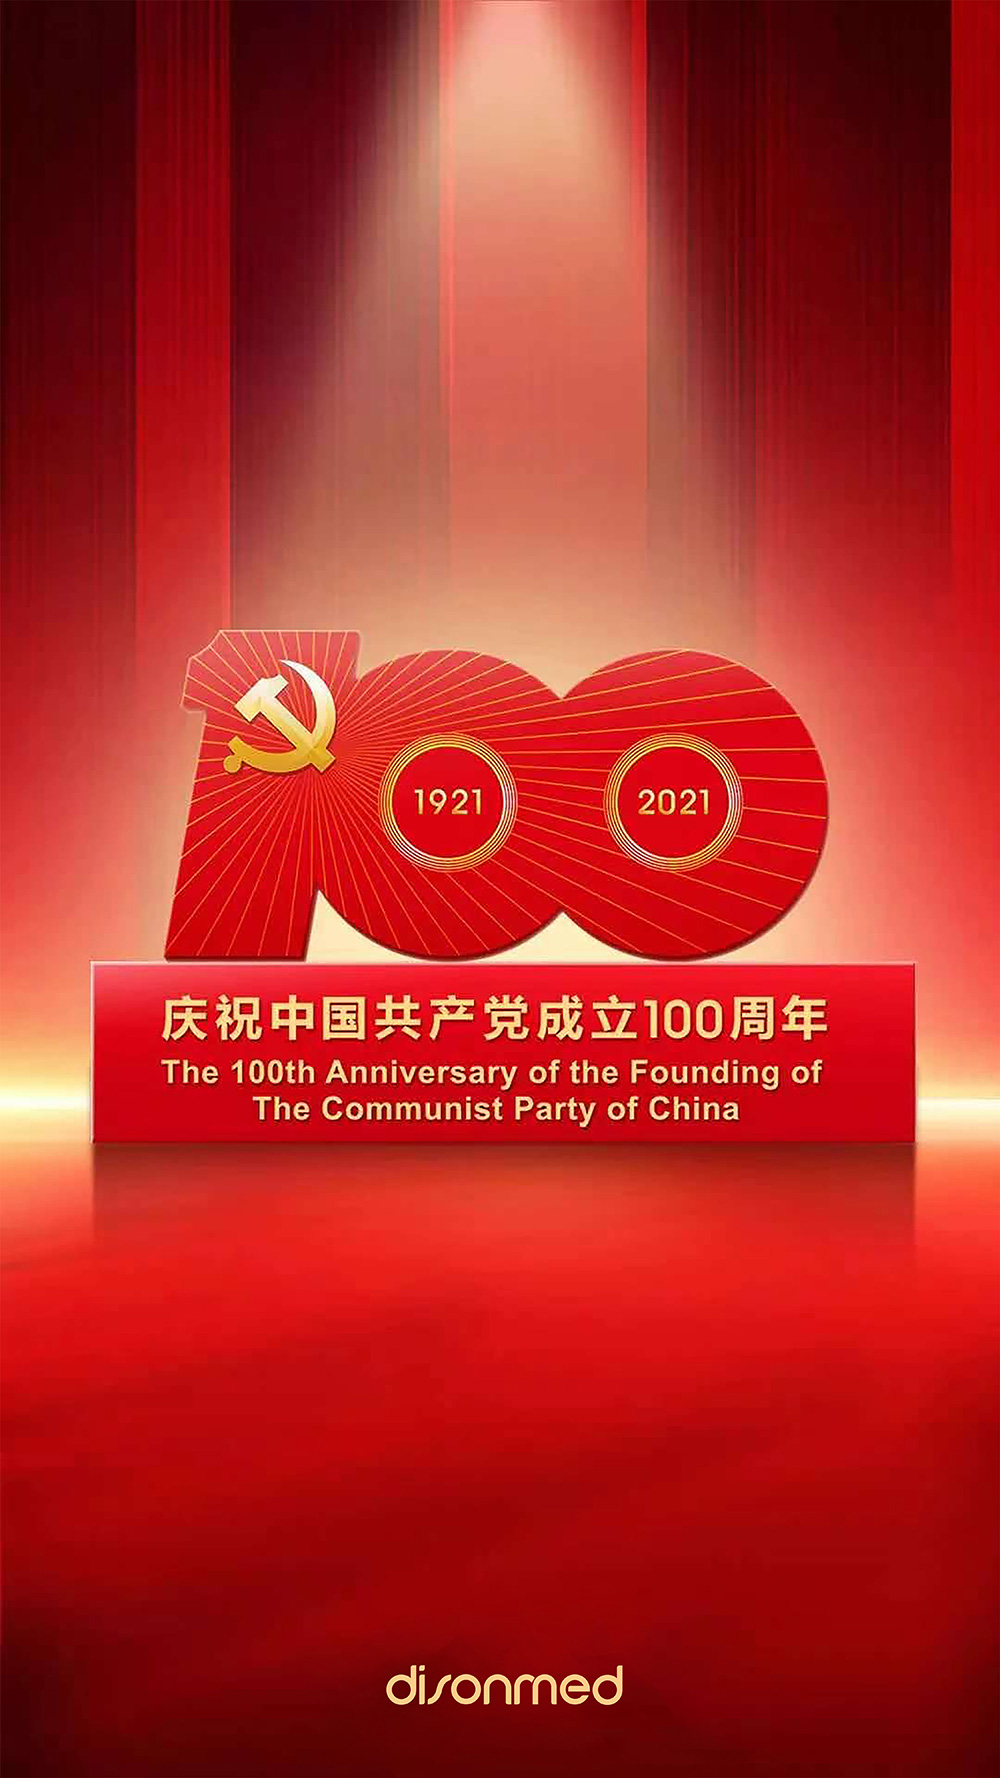 The 100th Anniversary of Founding of The Community Party of China